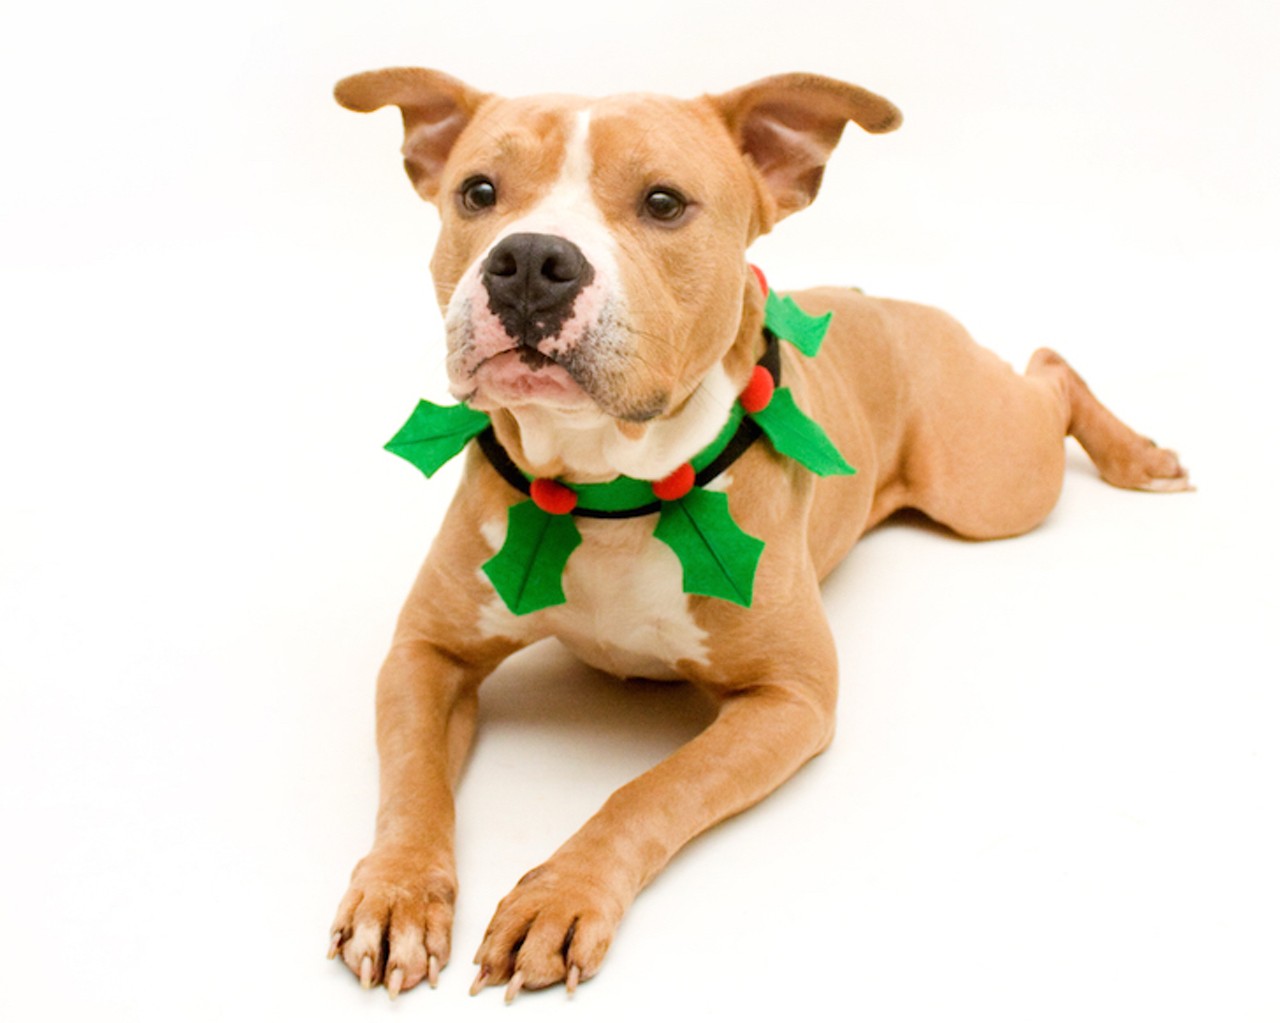 29 adorable dogs and cats looking for a new home this Christmas